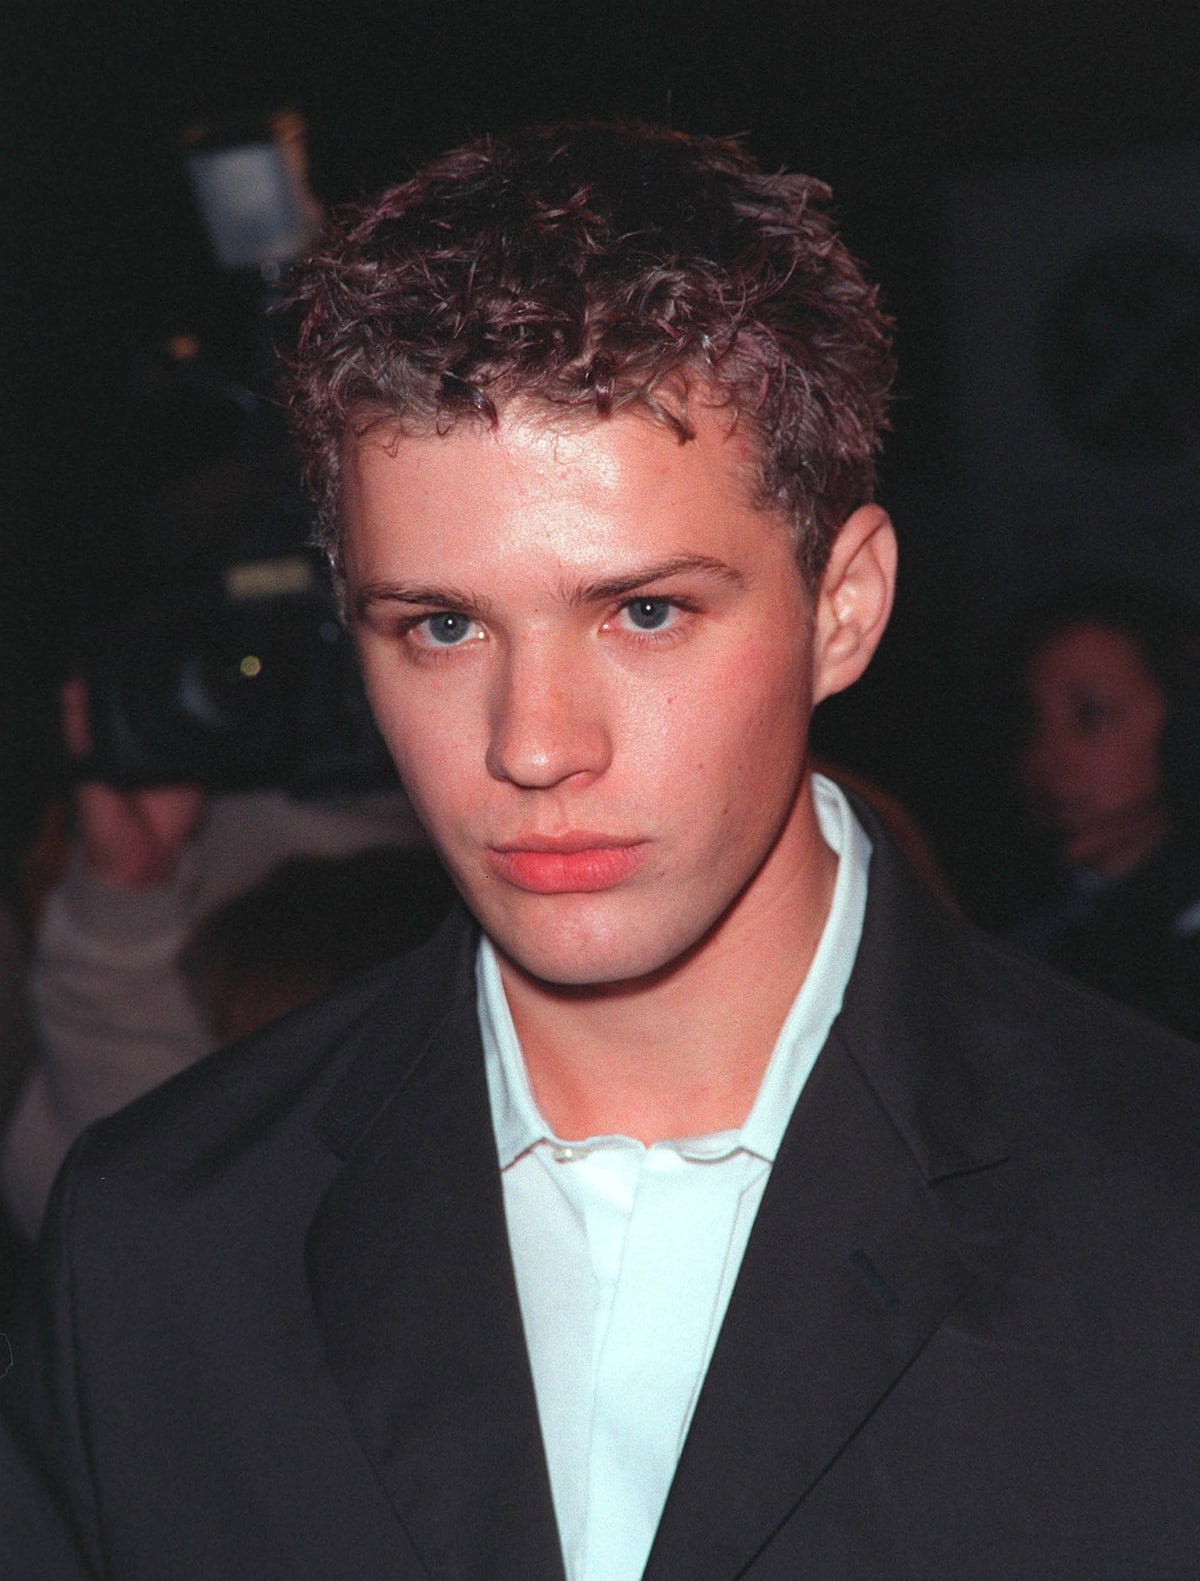 Ryan Phillippe was 24 years old when she attended the premiere of Cruel Intentions in 1999